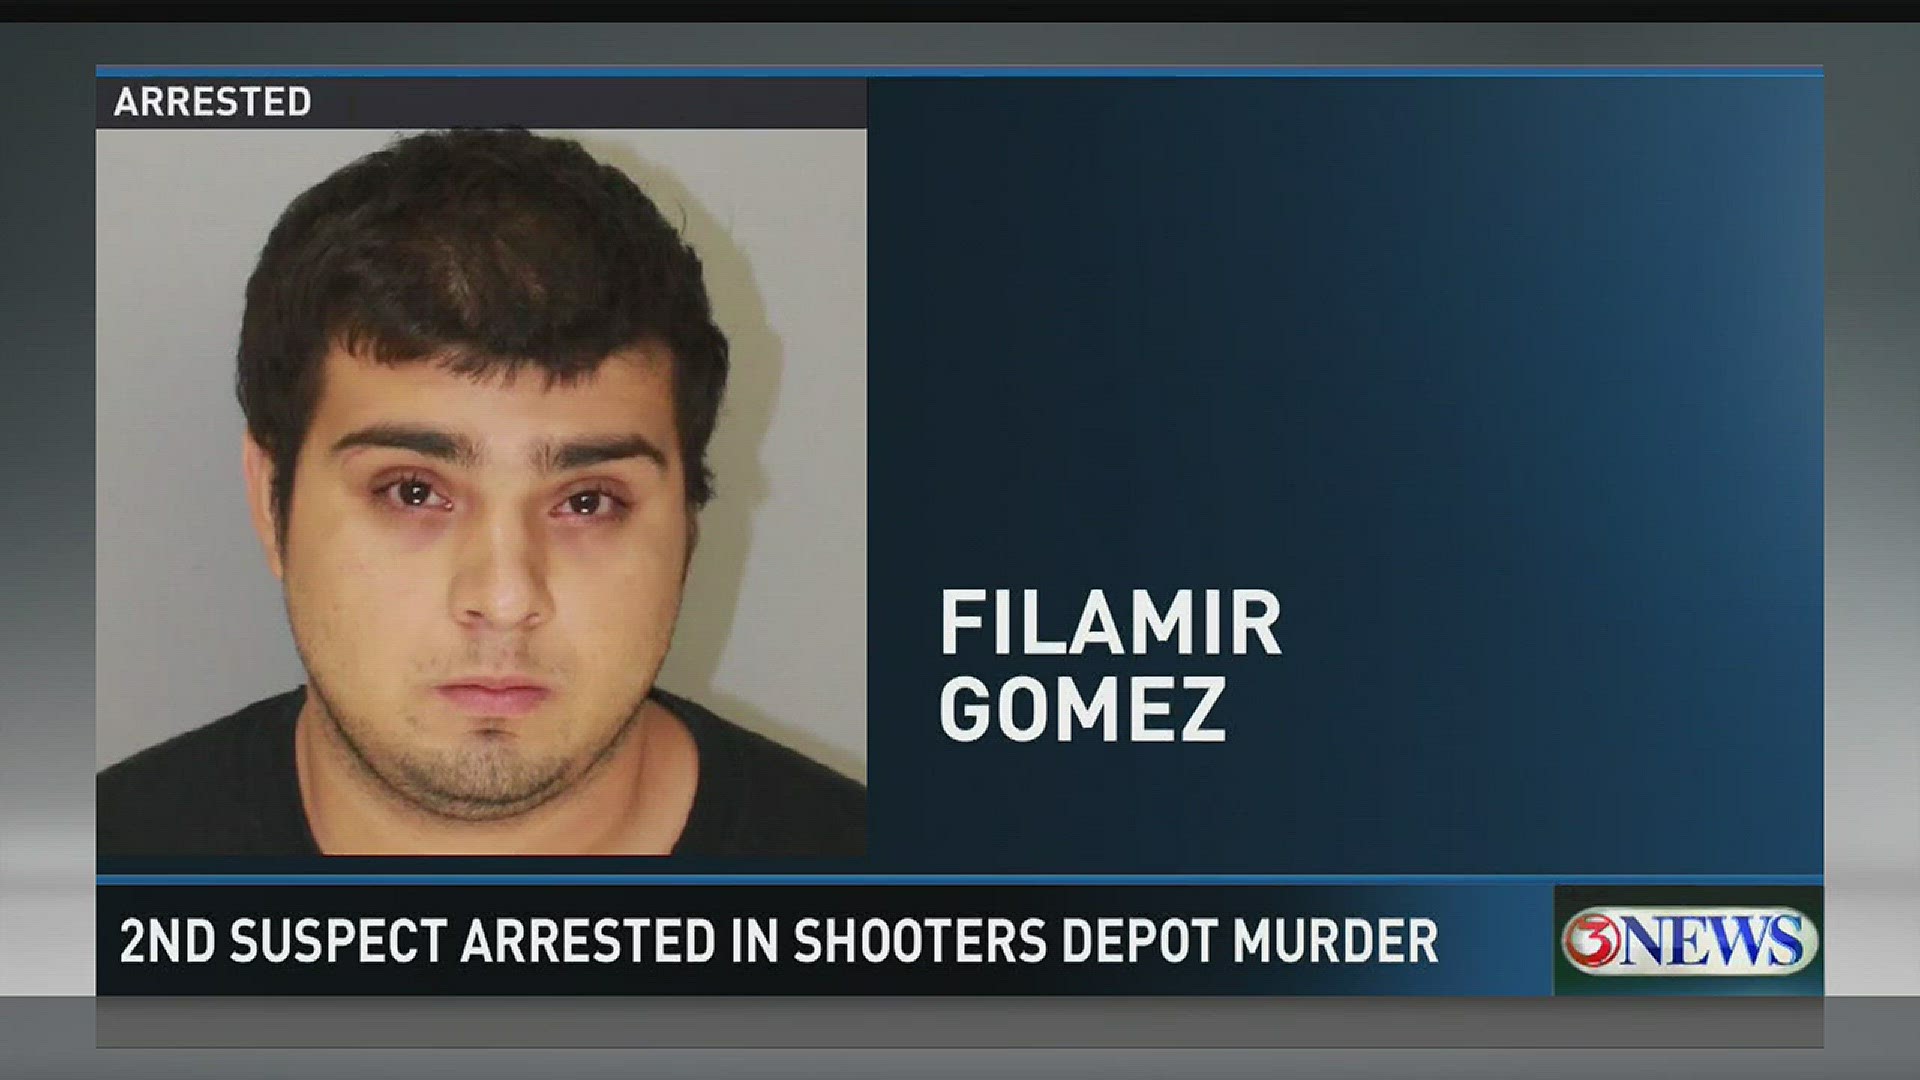 The U.S. Marshal's Gulf Coast Fugitives and Violent Offenders Task Force captured 20-year-old Filamir Gomez in San Diego, Texas Wednesday afternoon.